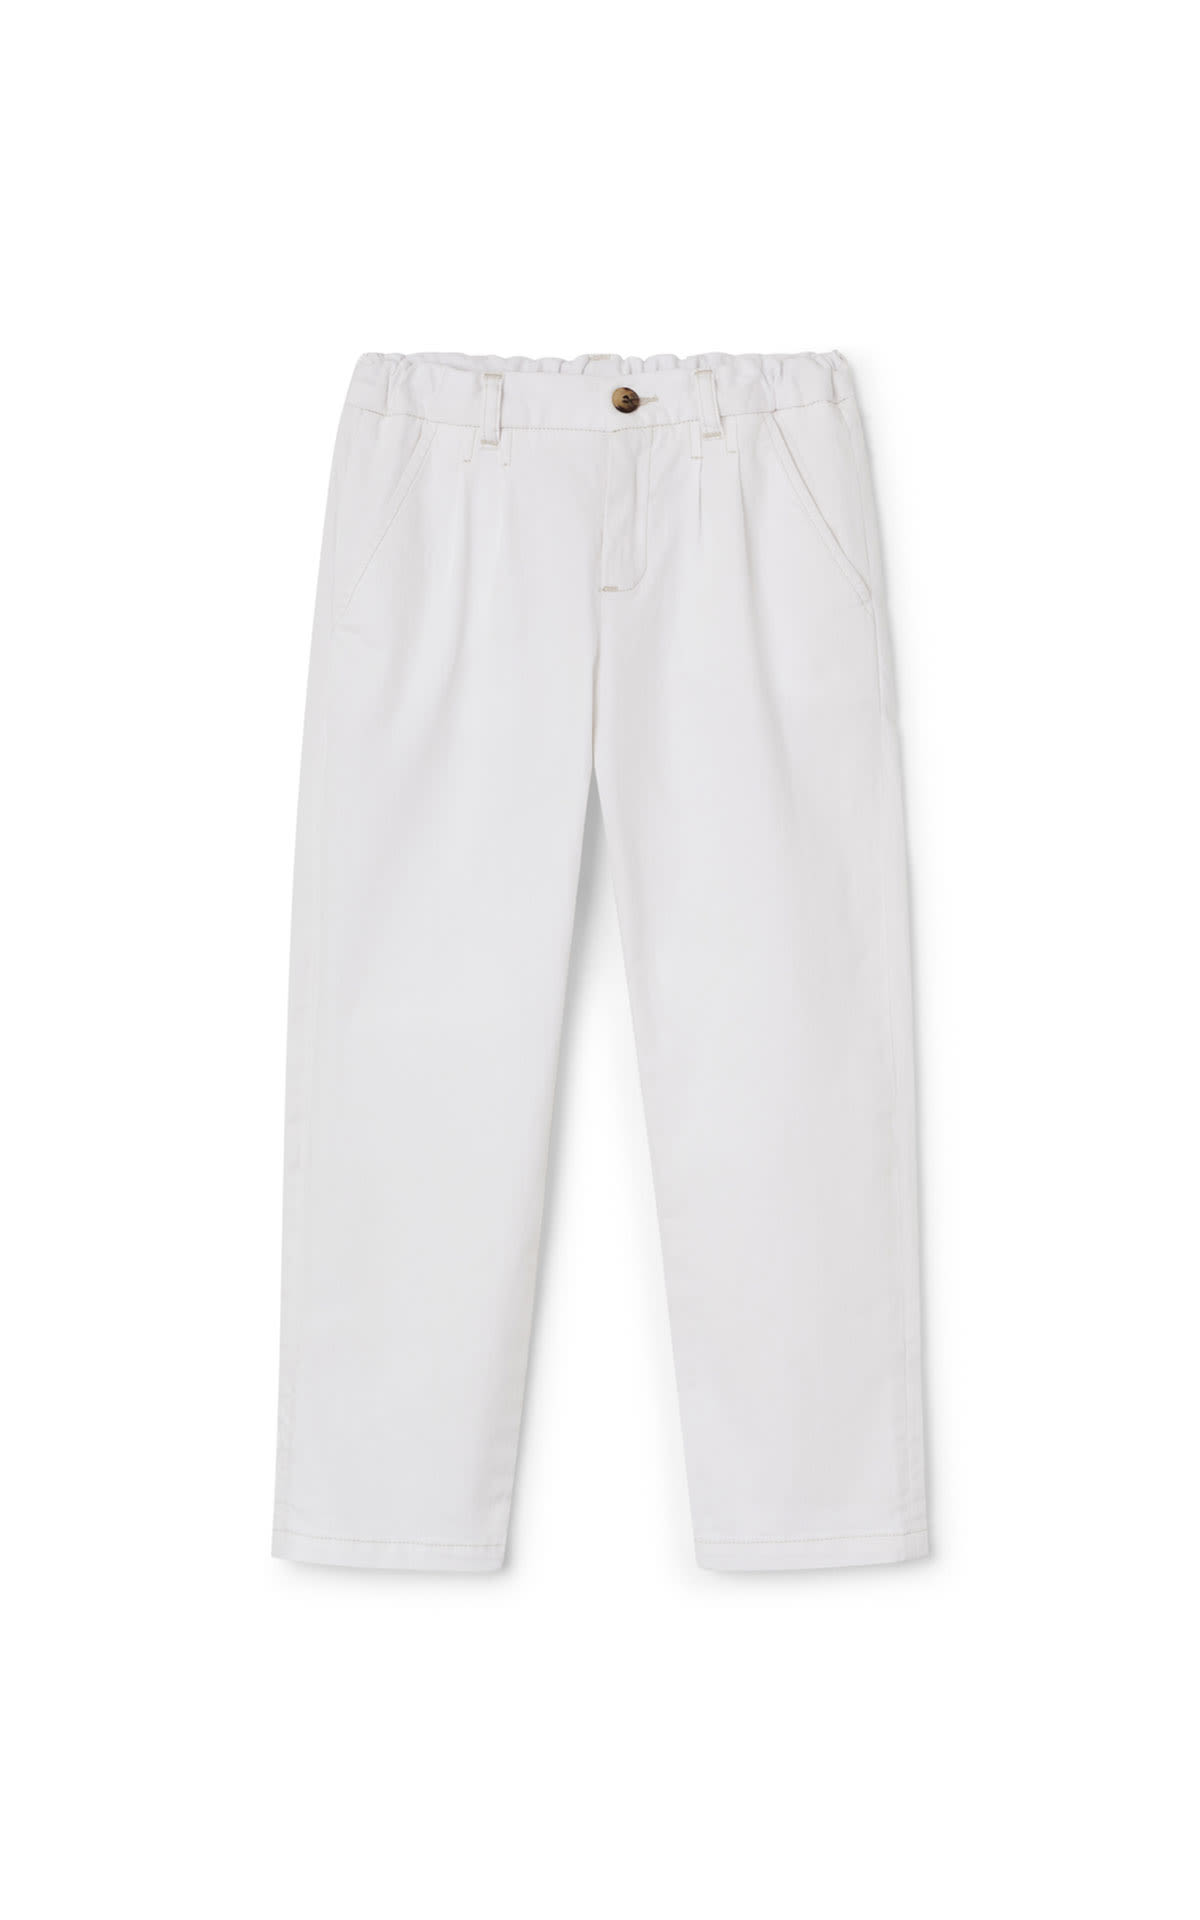 Bonpoint Boy's trousers from Bicester Village